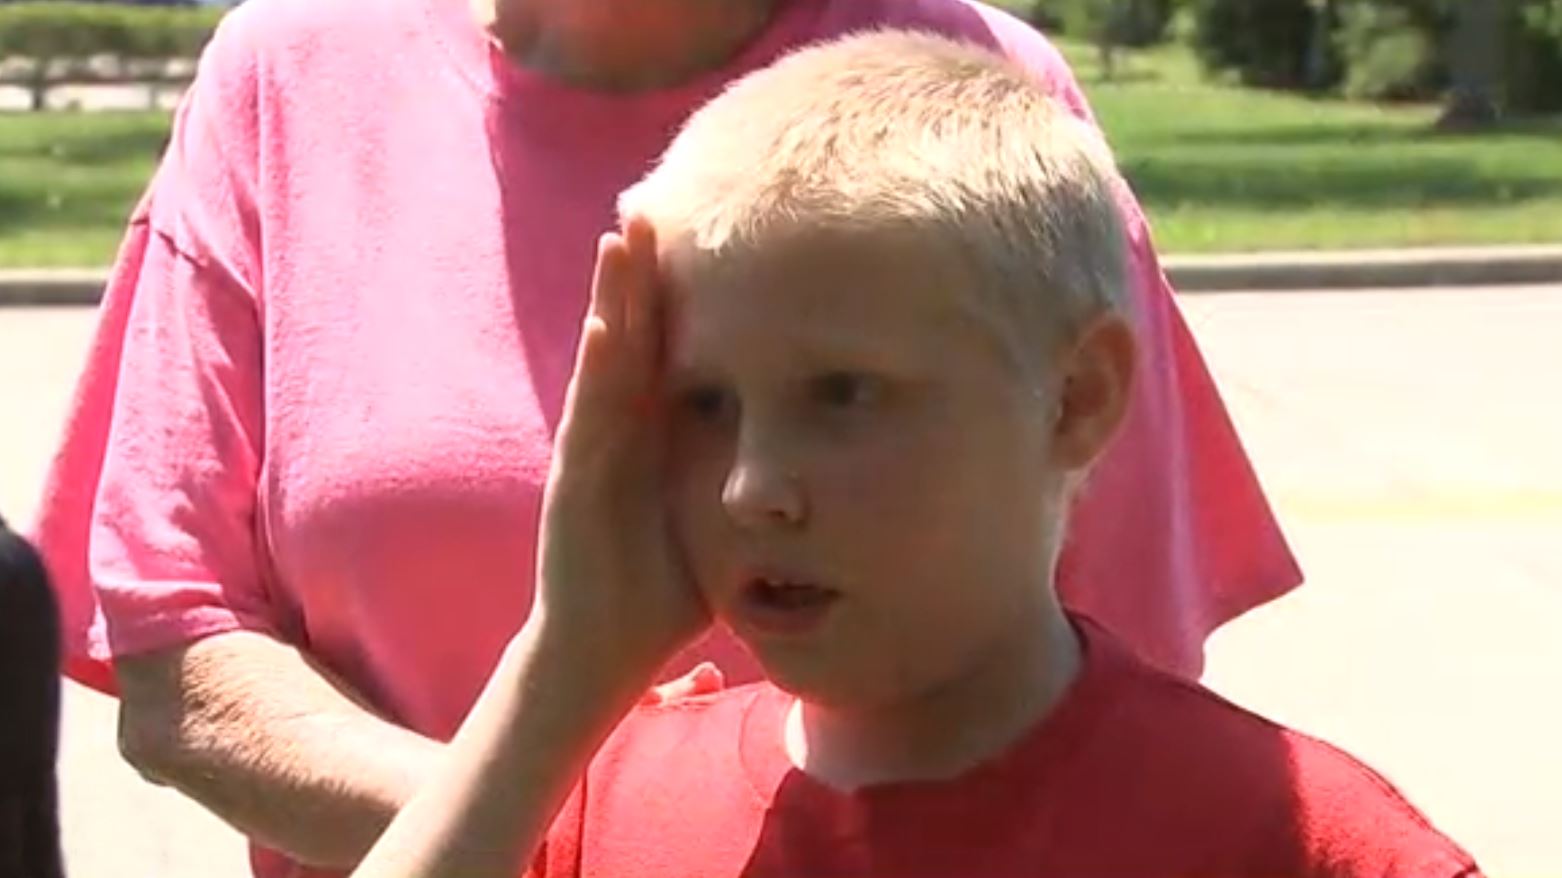 12-Year-Old Autistic Boy Arrested For Playing With Imaginary Gun